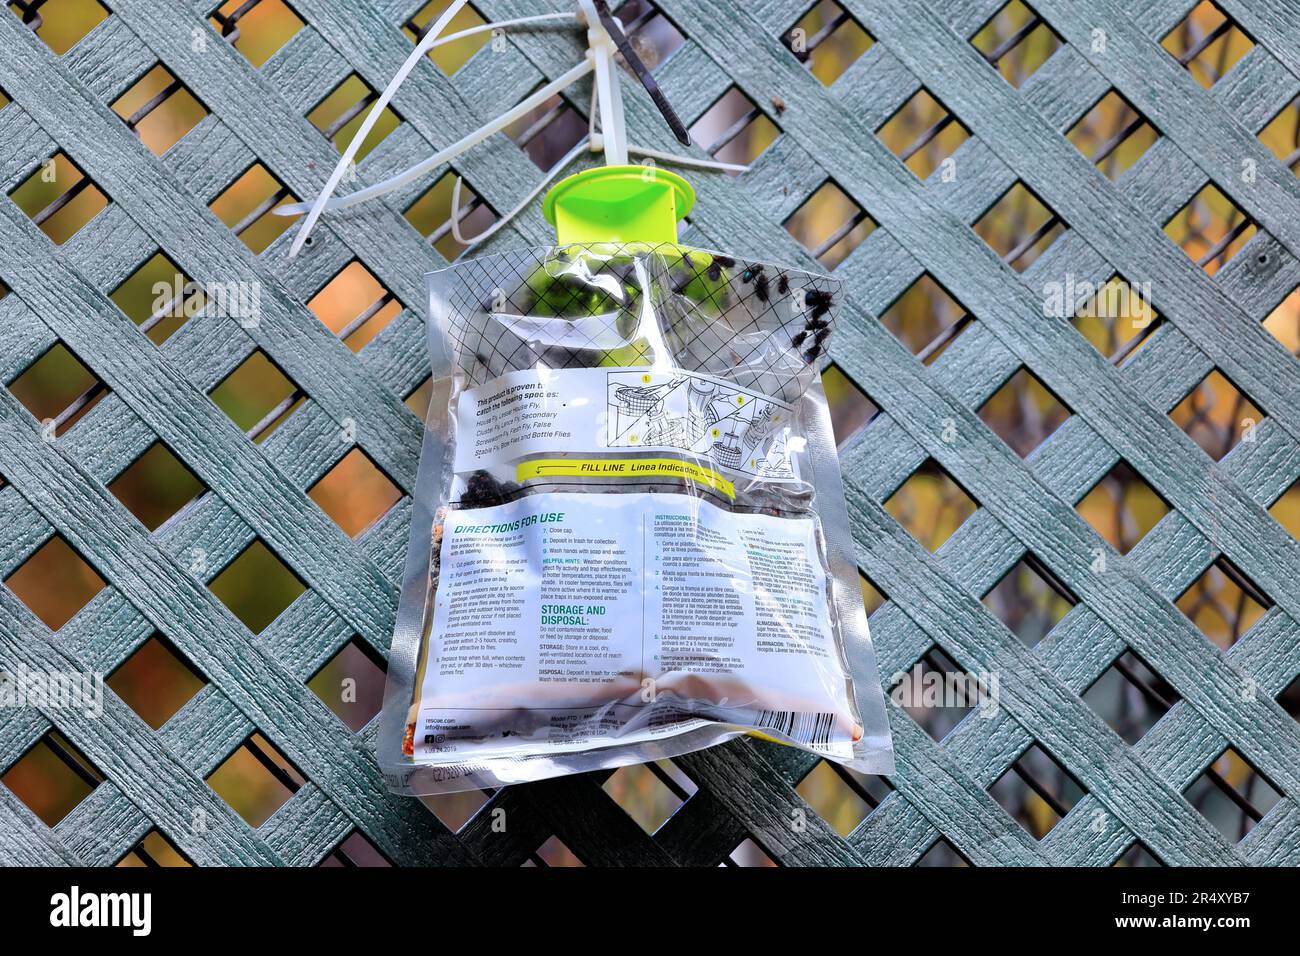 A Rescue brand Outdoor Disposable Fly Trap strapped to a wall, and filled with flies. Stock Photo